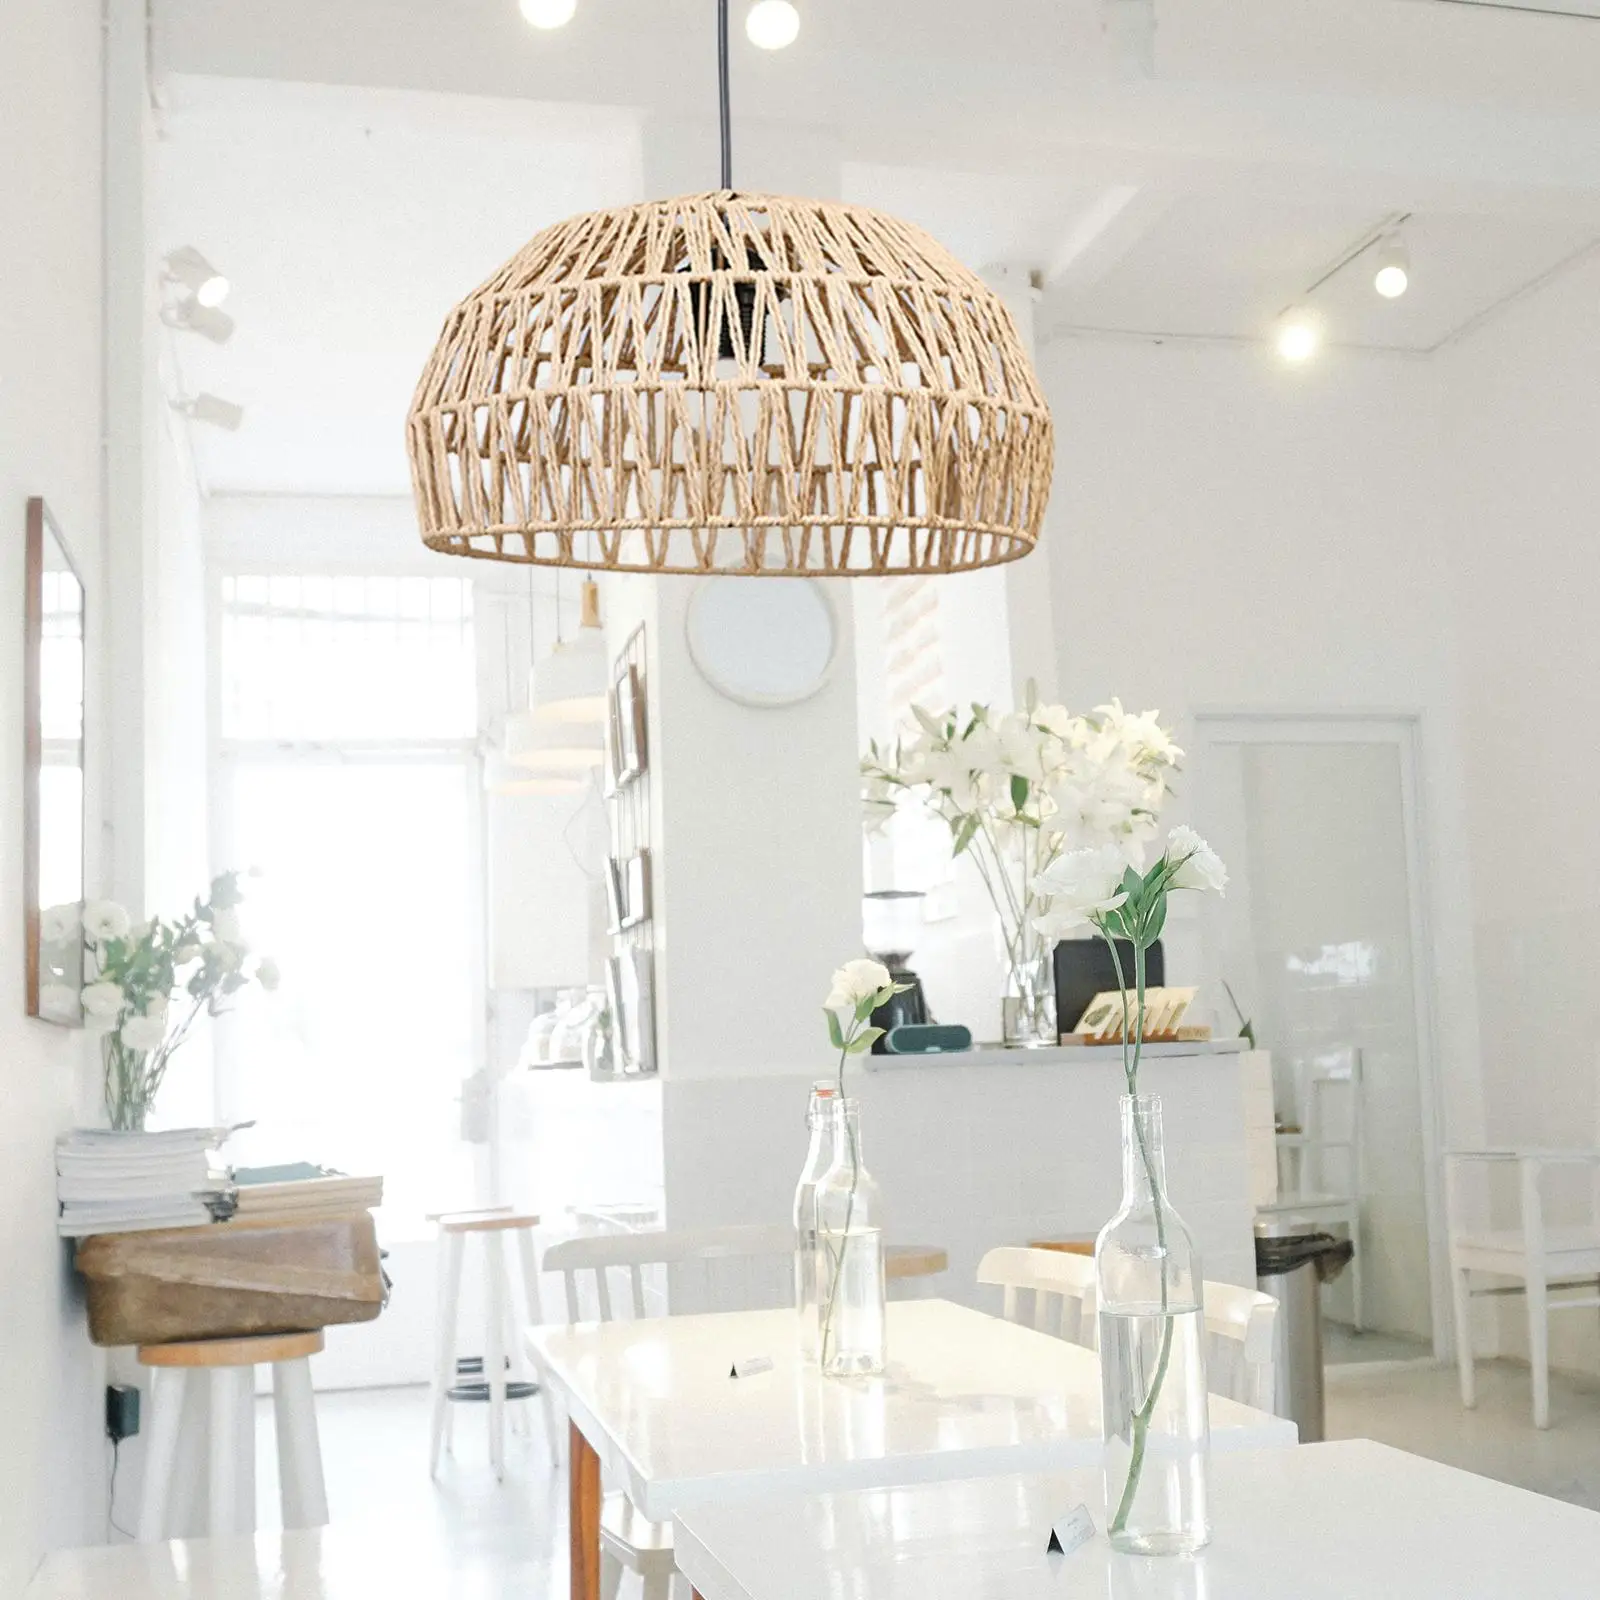 Retro Style Pendant Lamp Shade Weave Chandelier Paper Rope Woven Lampshade Lamp Cover for Bedroom, Kitchen Island